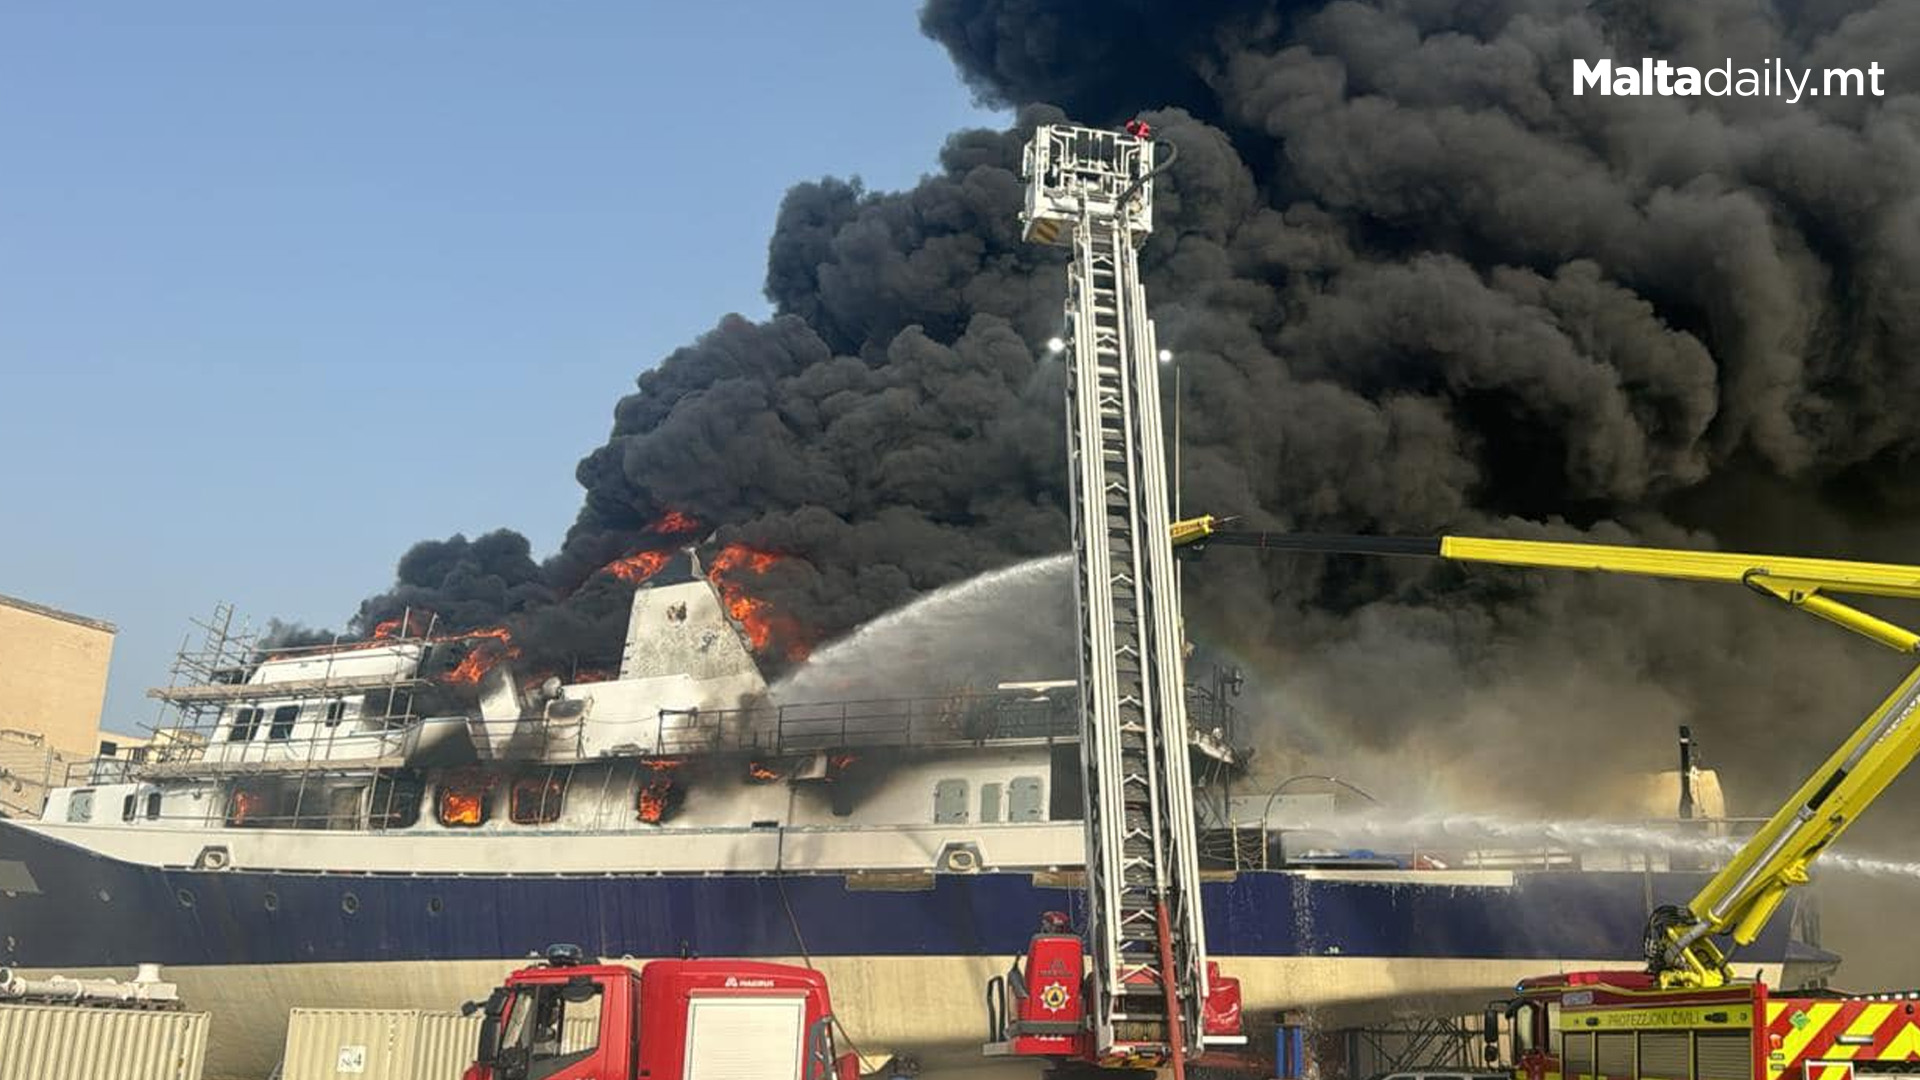 No One Injured In Boat Fire In Marsa: Authorities On Site